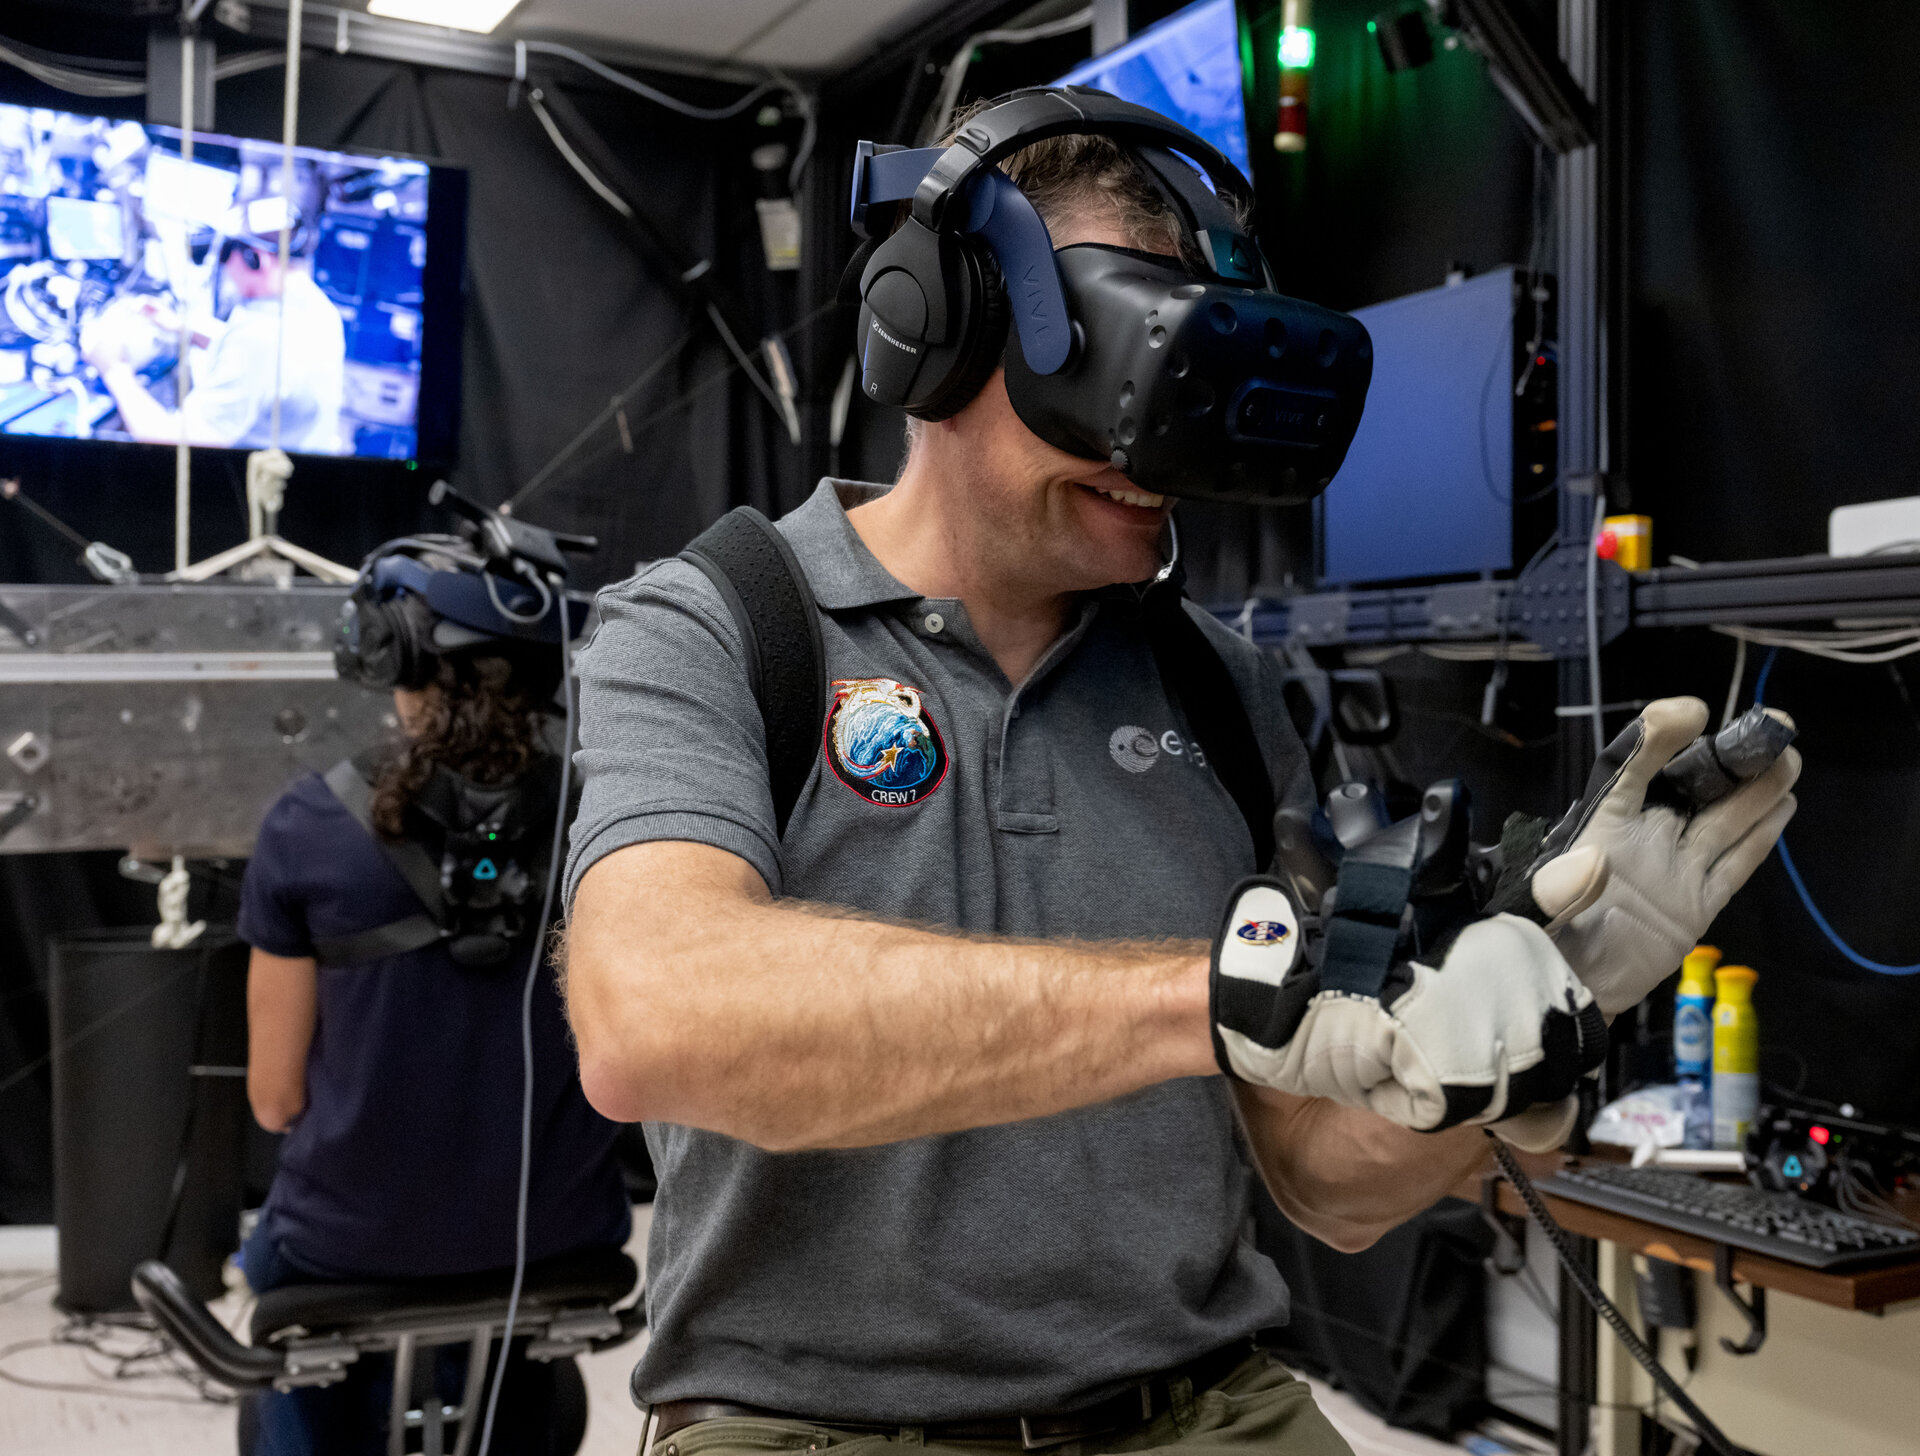 A digital actuality headset shall be launched to the Worldwide Area Station this week to assist astronauts’ psychological well being